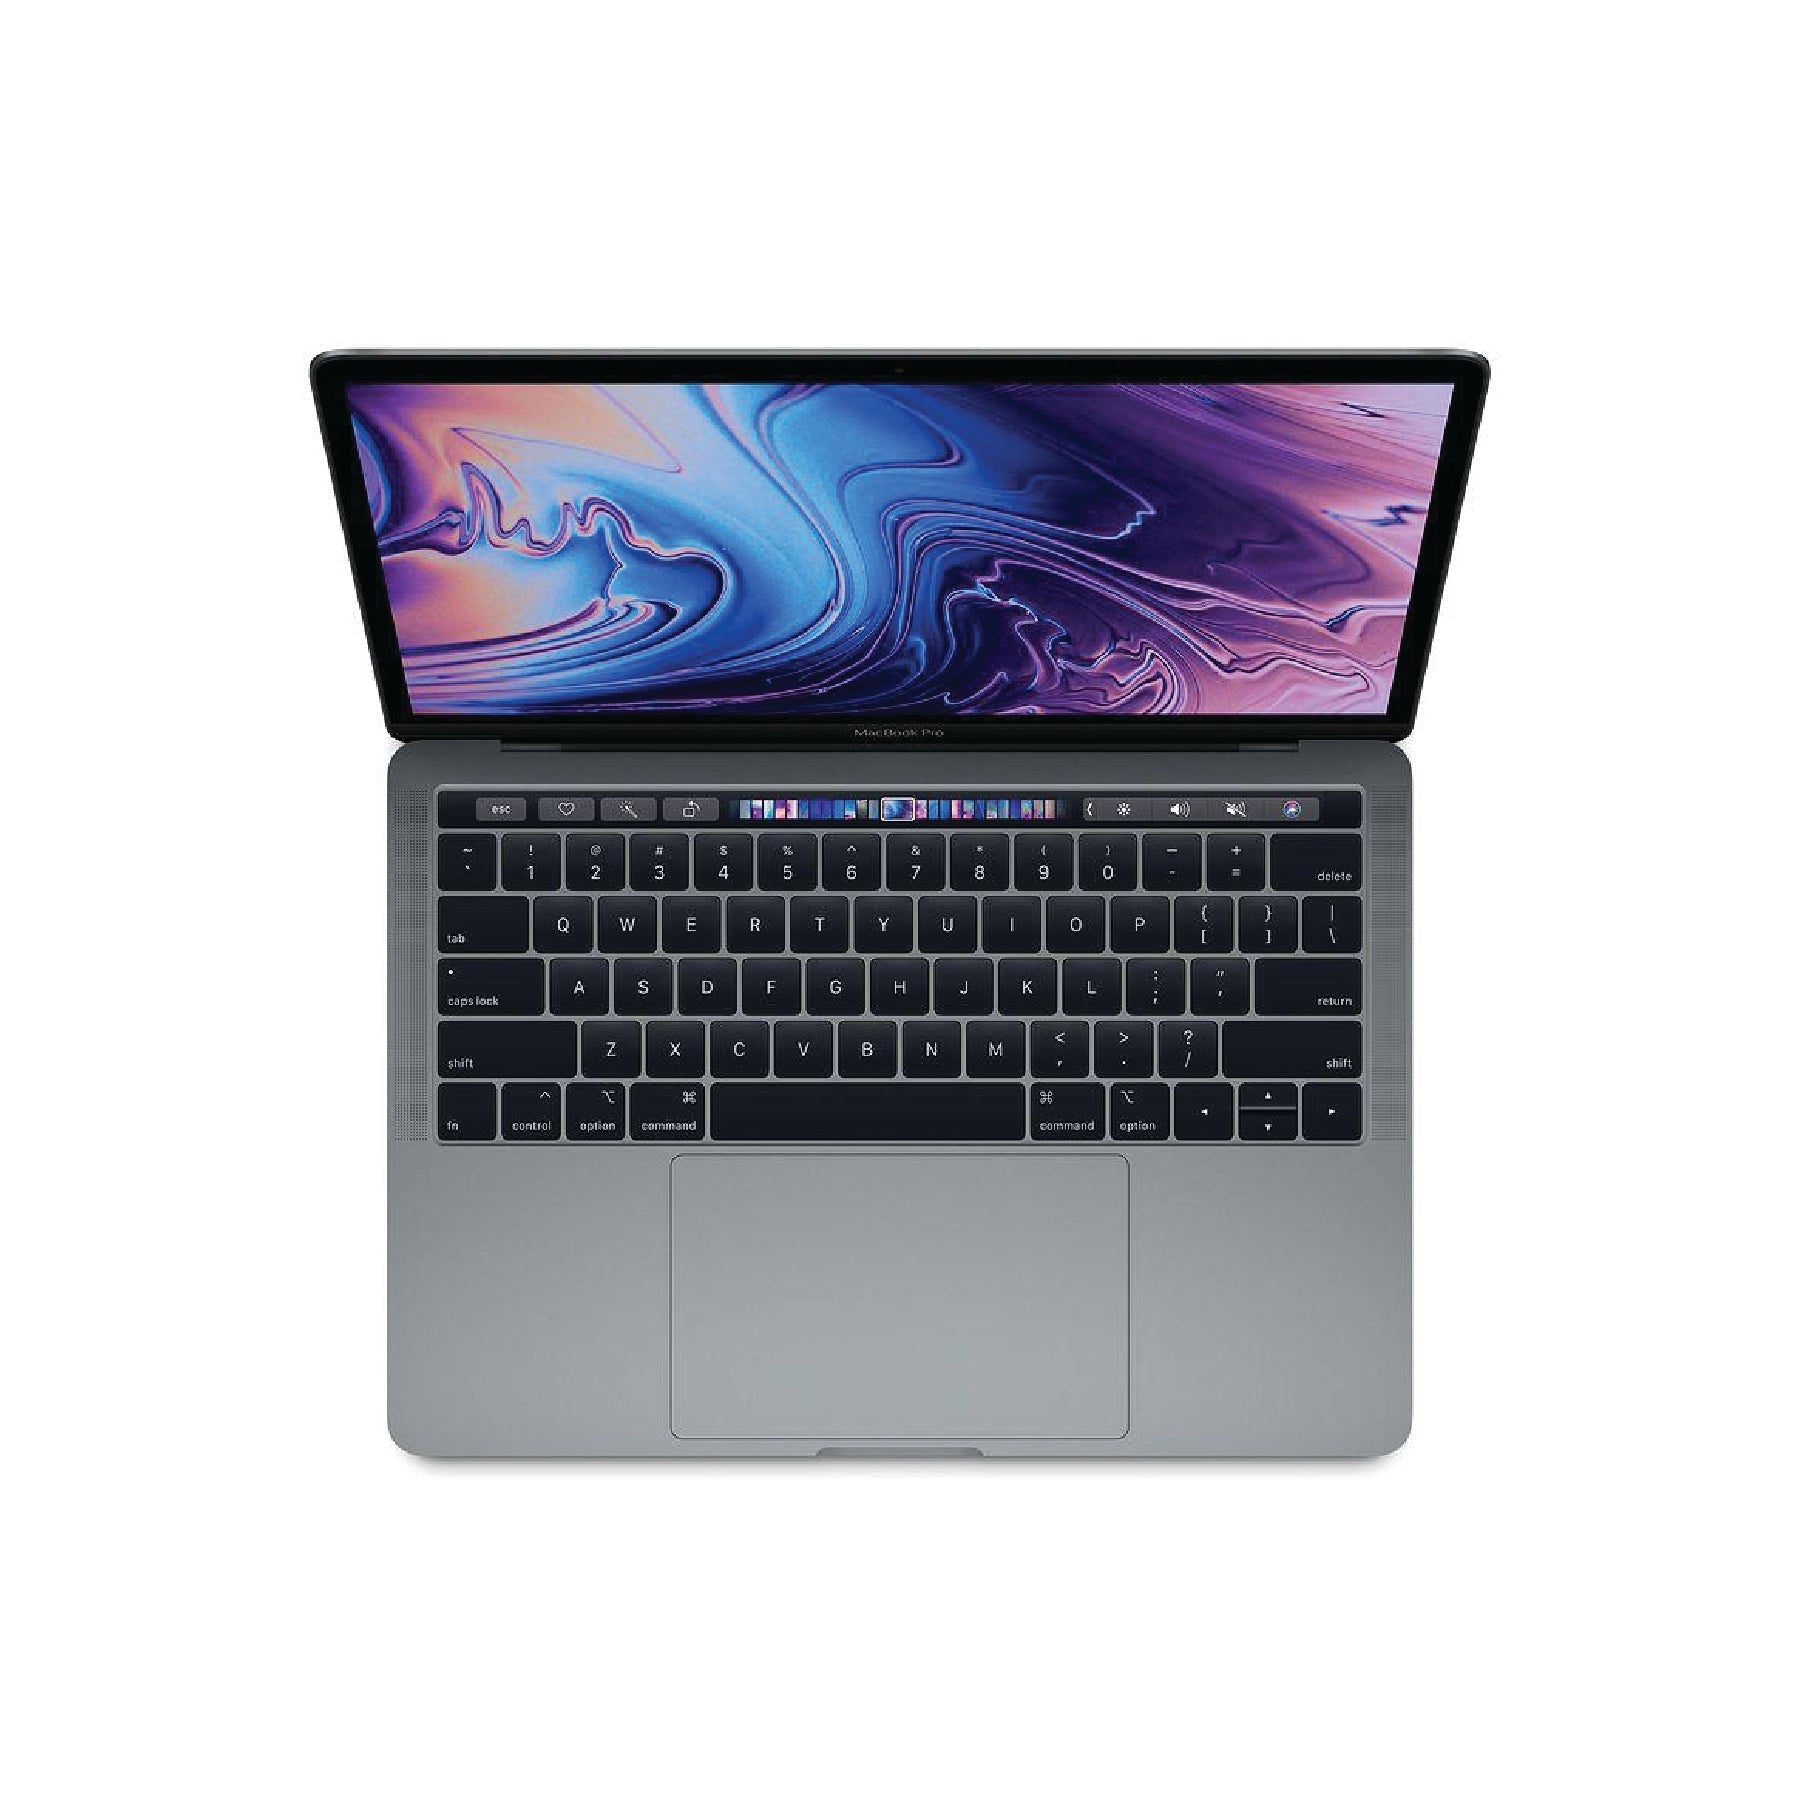 MacBook Pro (13-inch, 2019, Four Thunderbolt 3 ports) 2.4GHz, Intel Core i5 256GB - Space Grey (Best) - iStore Pre-owned